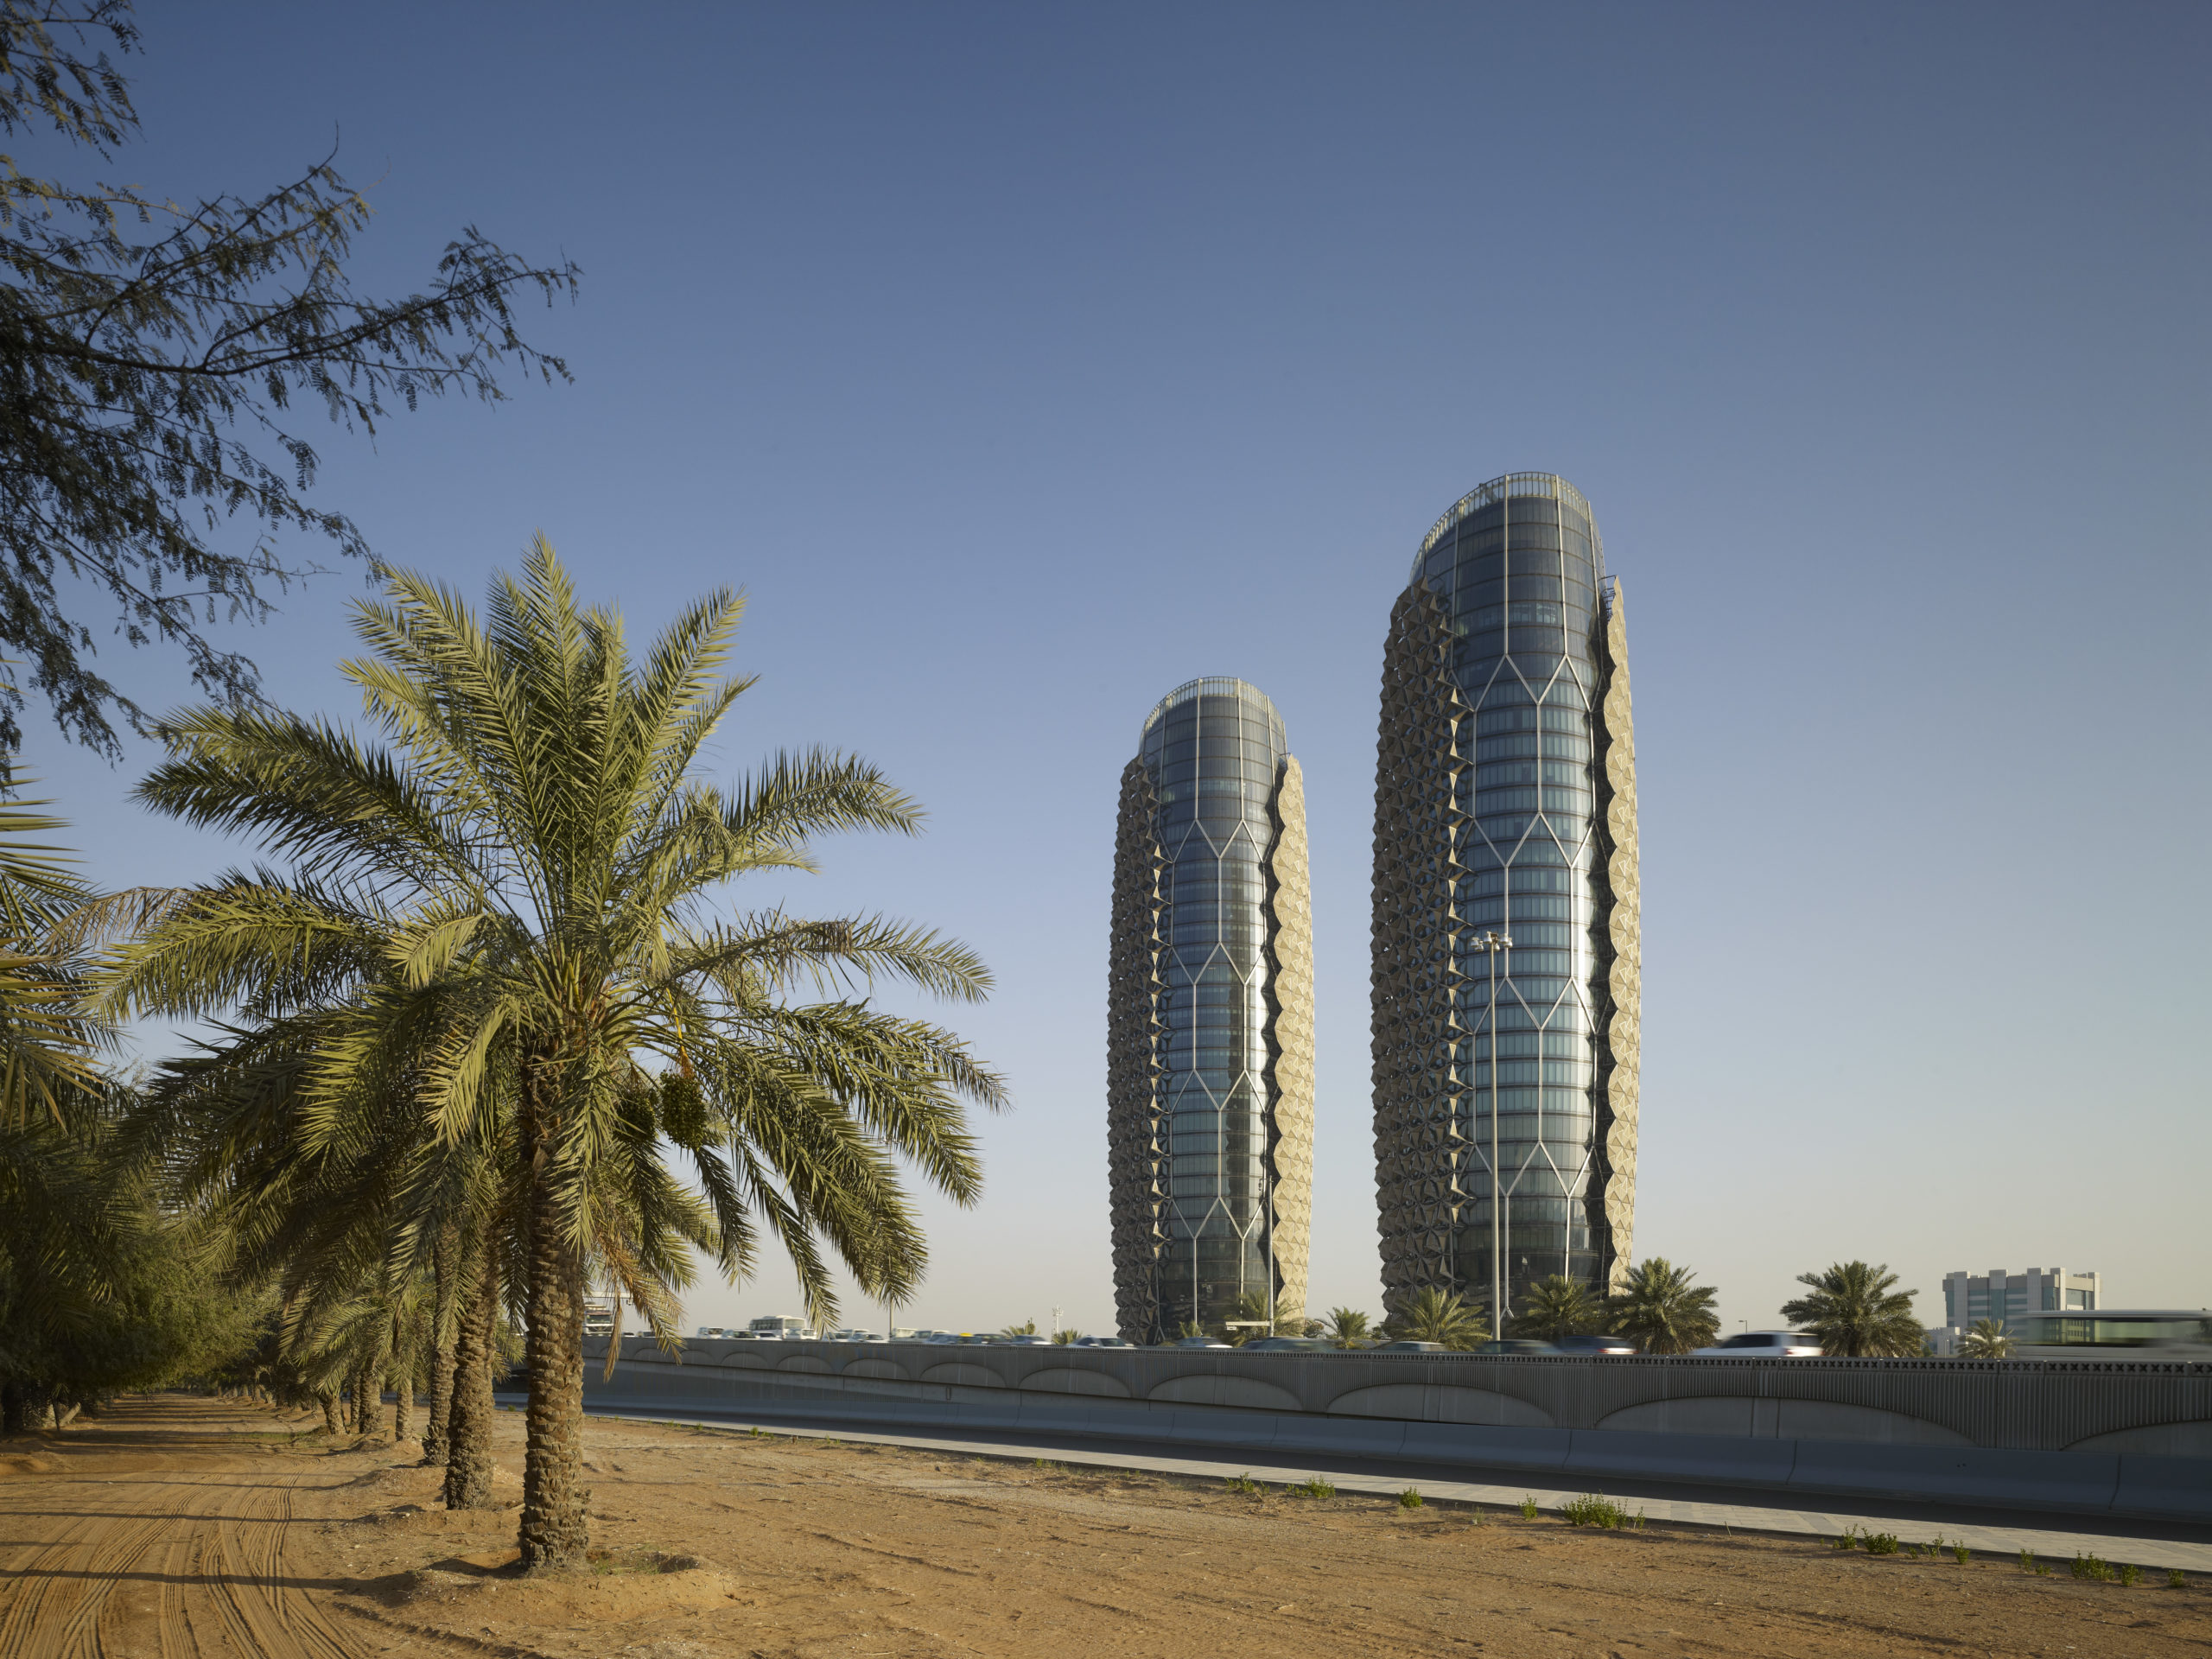 Figure 2. In Abu Dhabi, a set of towers by the design firm Aedas features a “breathing” exterior with an alluring effect: faceted fiberglass rosettes open and close depending on the façade’s temperature. Peter Oborn, Aedas director says, "It… responds to the aspiration of the emirate to take a leadership role in the area of sustainability". Photo Copyright: AHR / Christian Richter